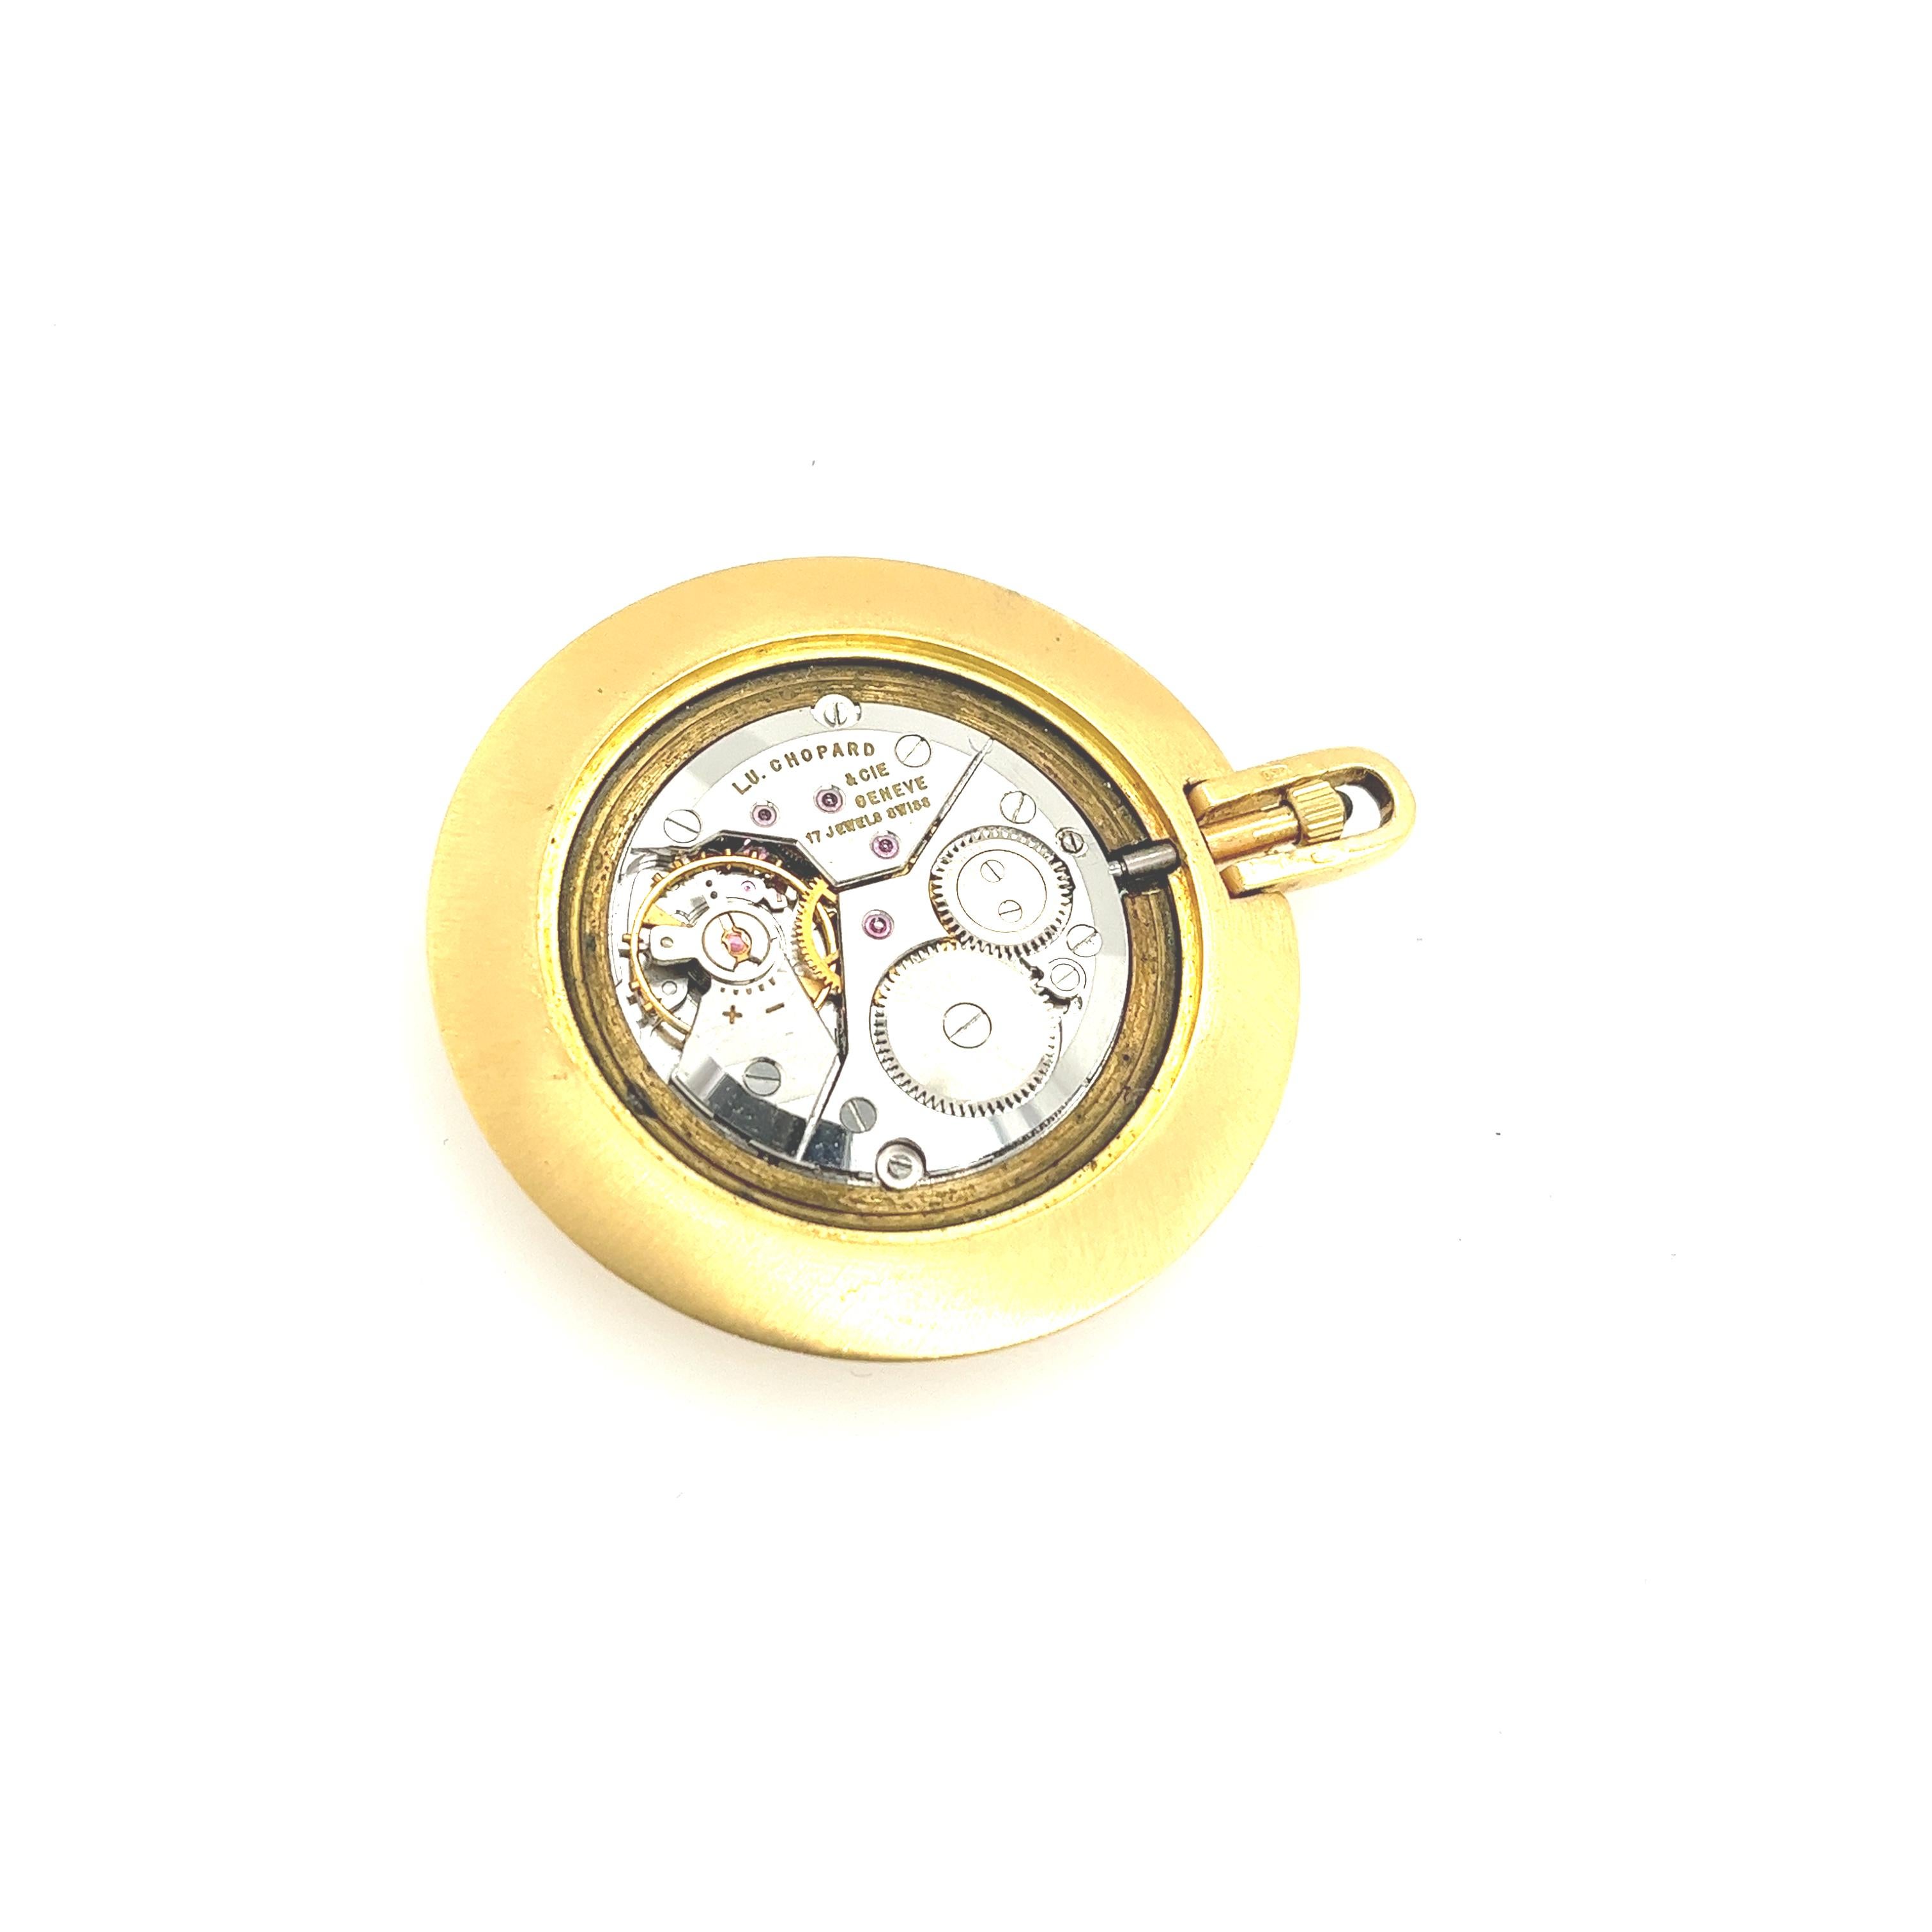 Fine Quality Kutchinsky Pocket Watch in 18ct Yellow Gold In Good Condition For Sale In London, GB